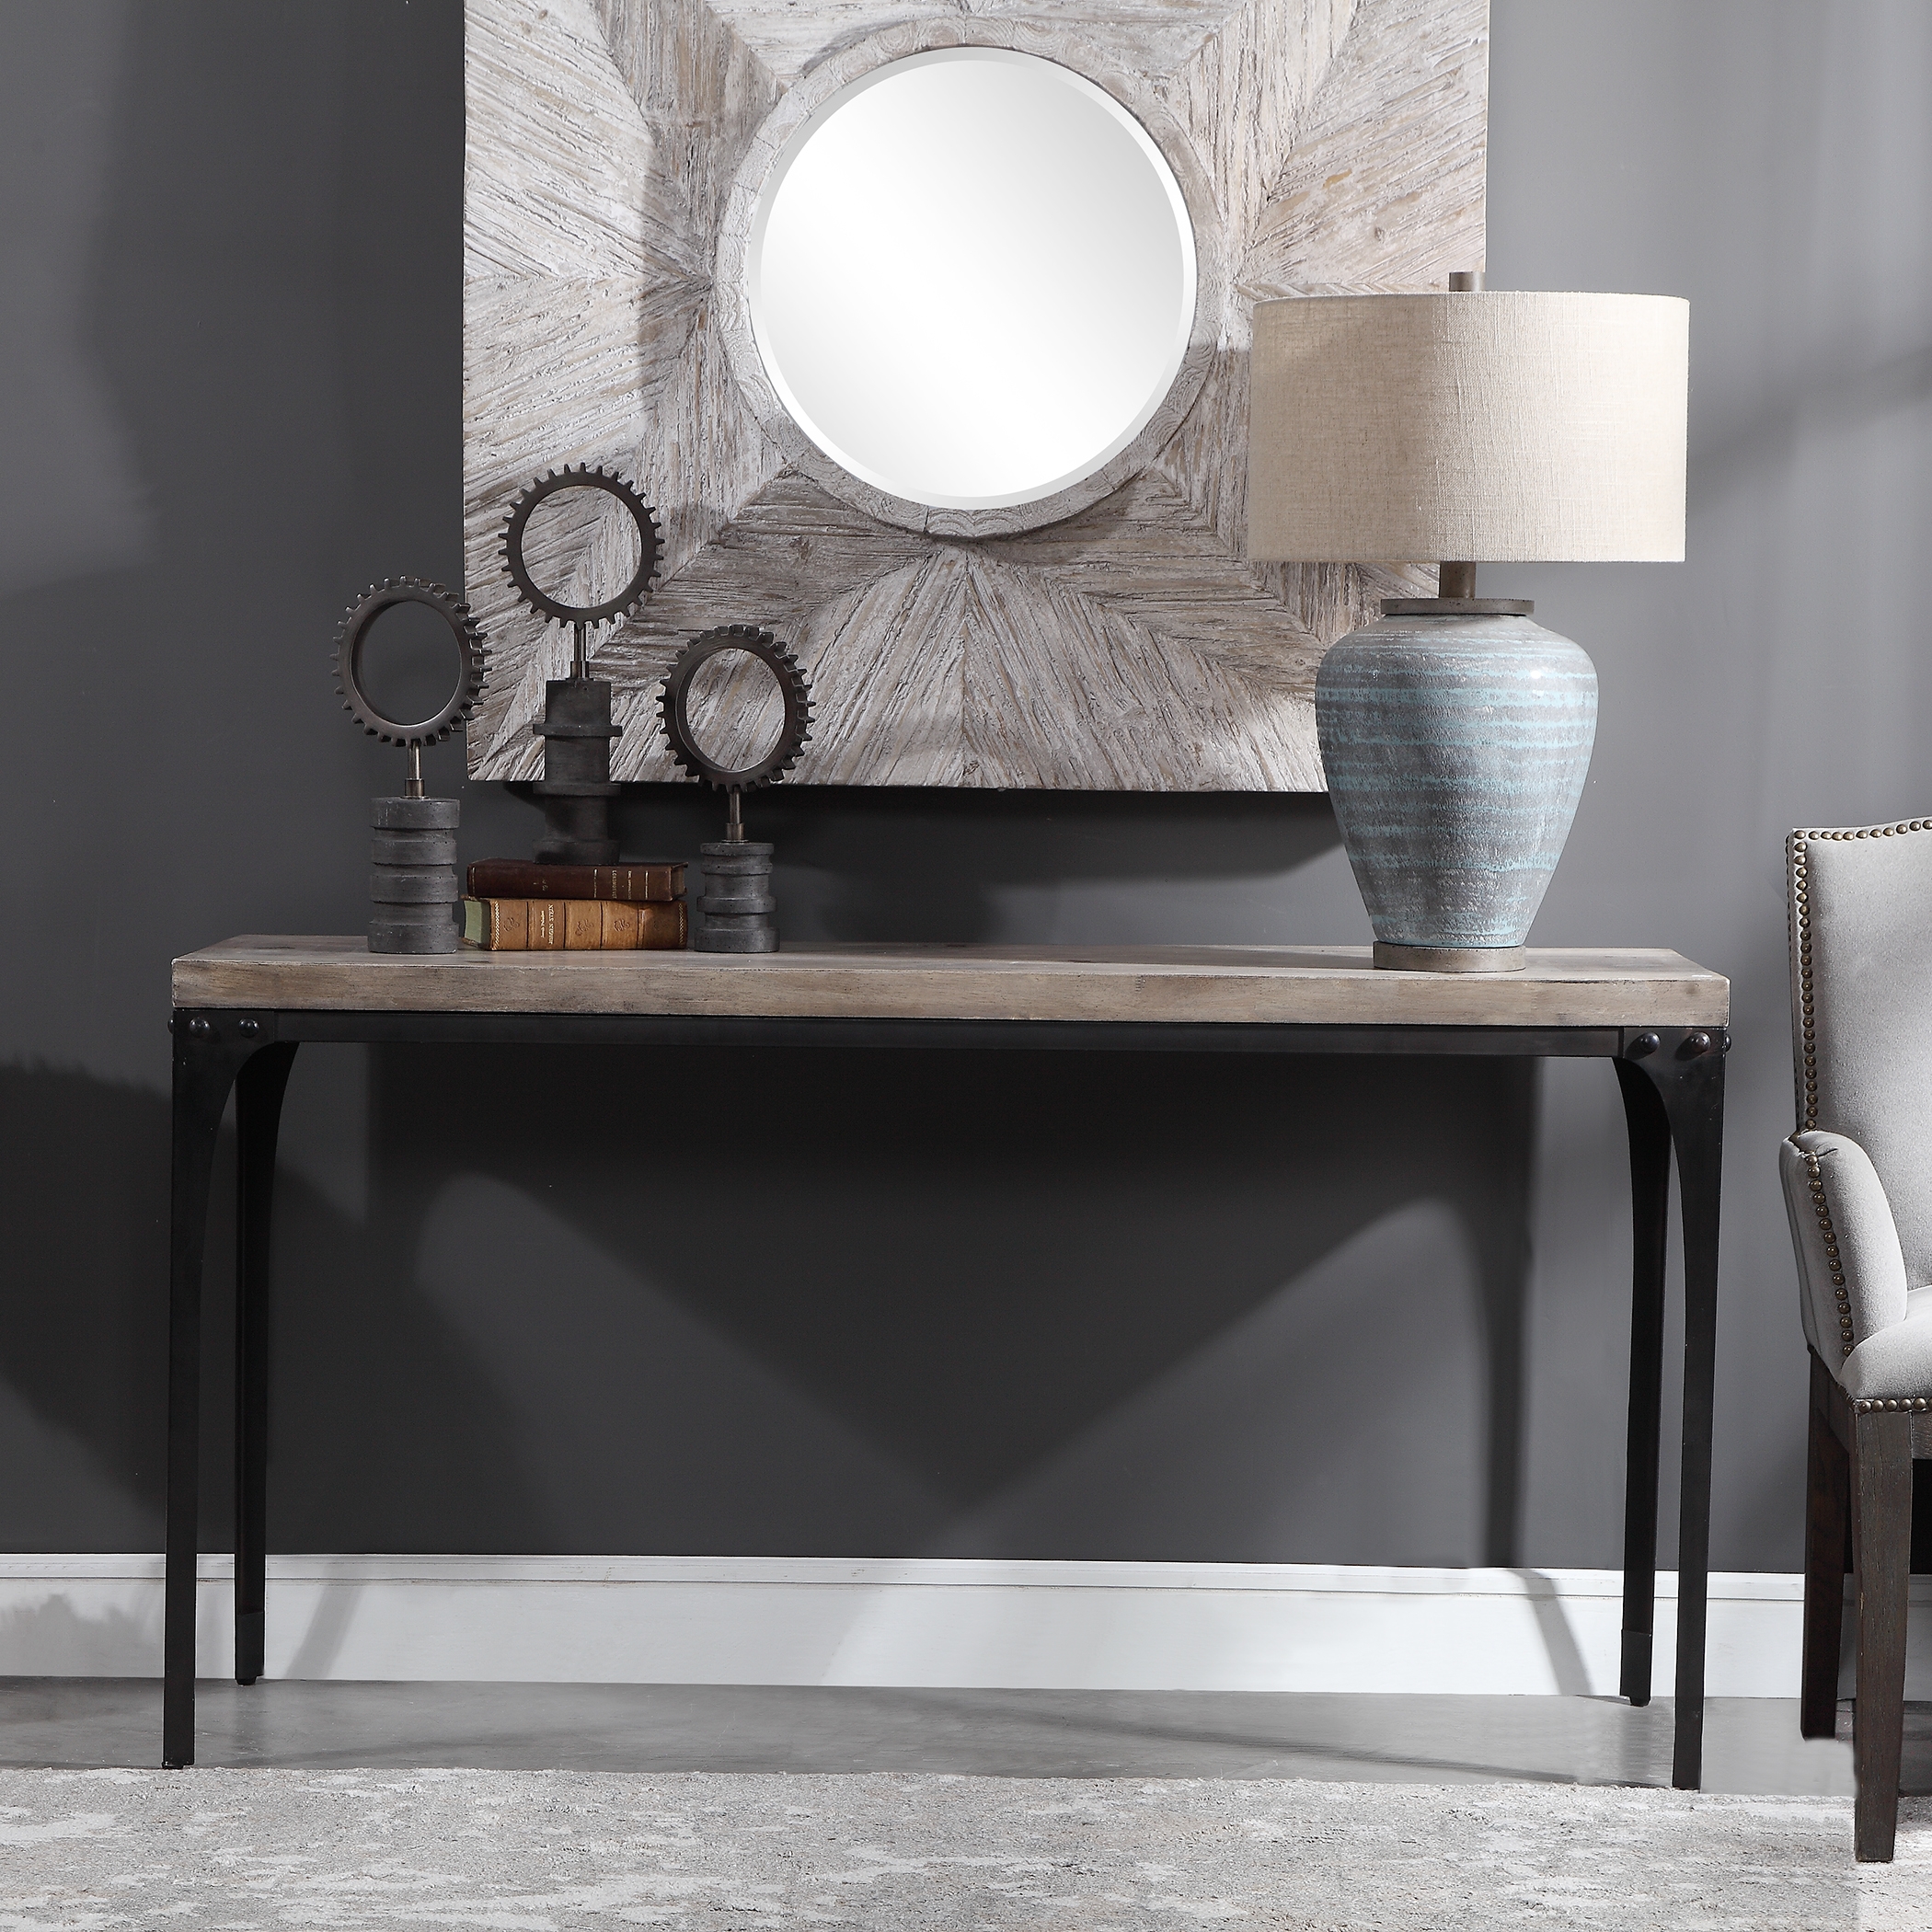 Blaylock Industrial Console Table - Image 2